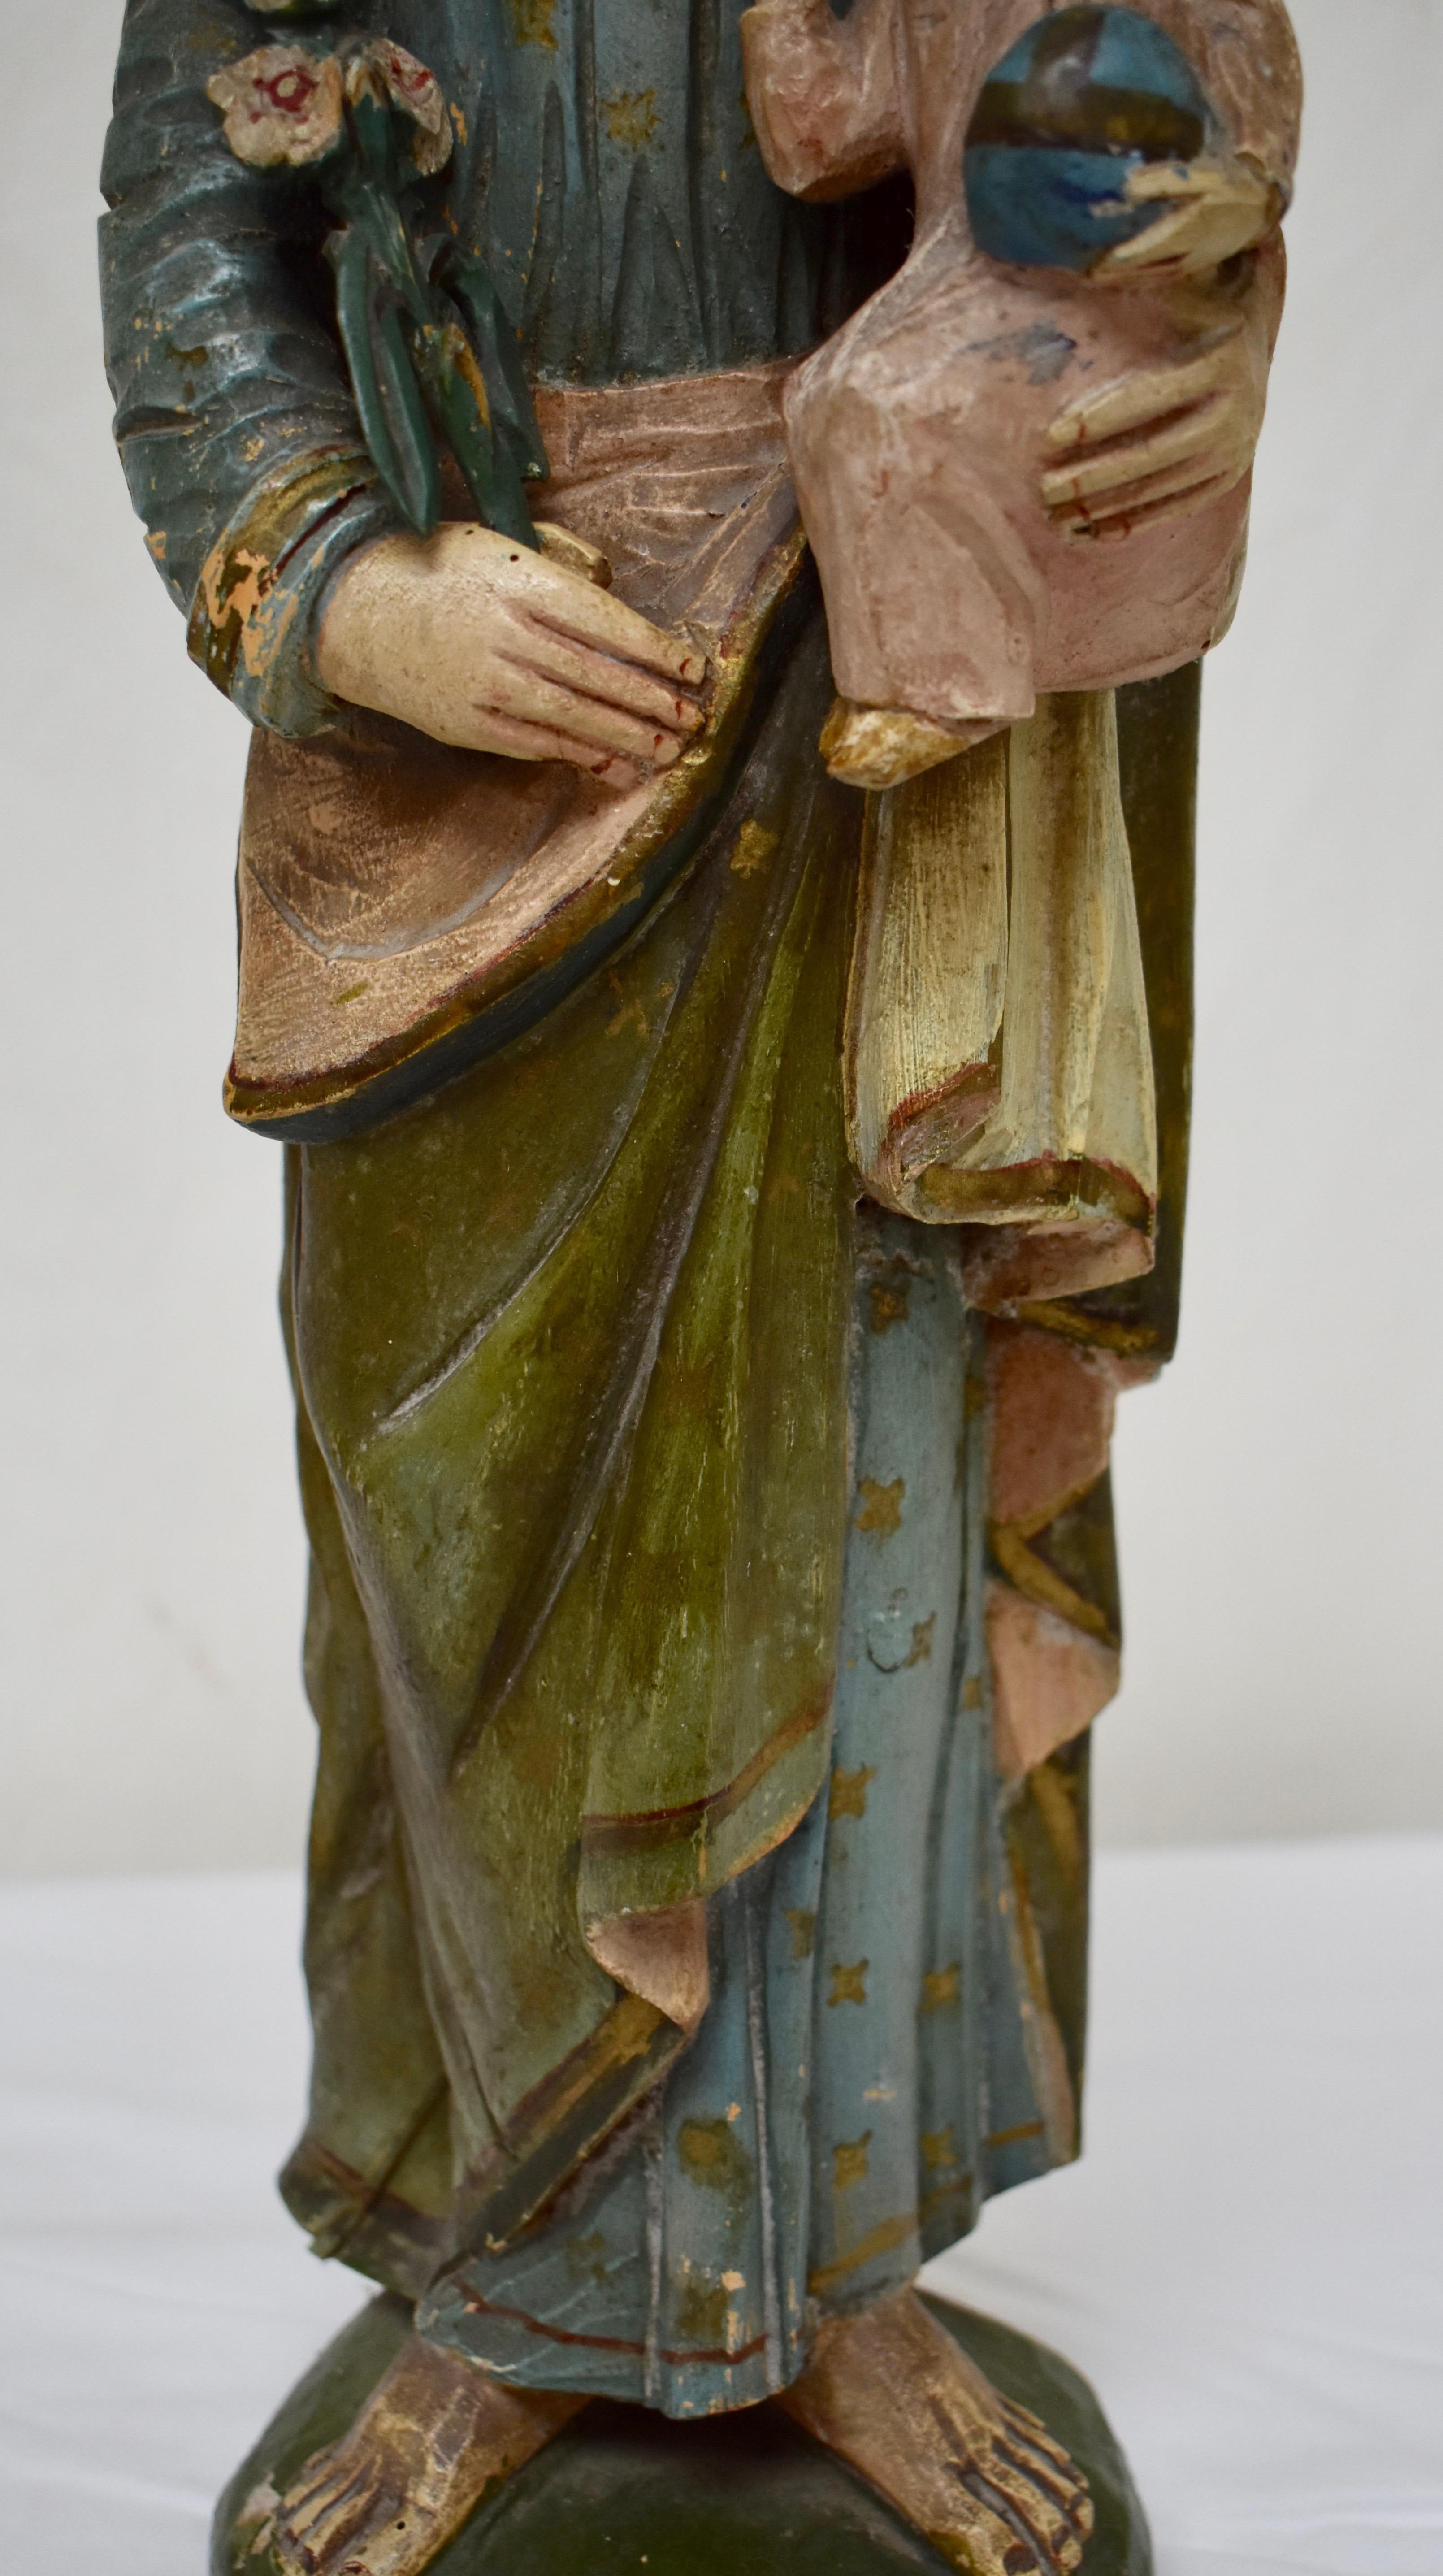 Hand-Carved Hand Carved Wooden Sculpture of Saint Joseph with Baby Jesus